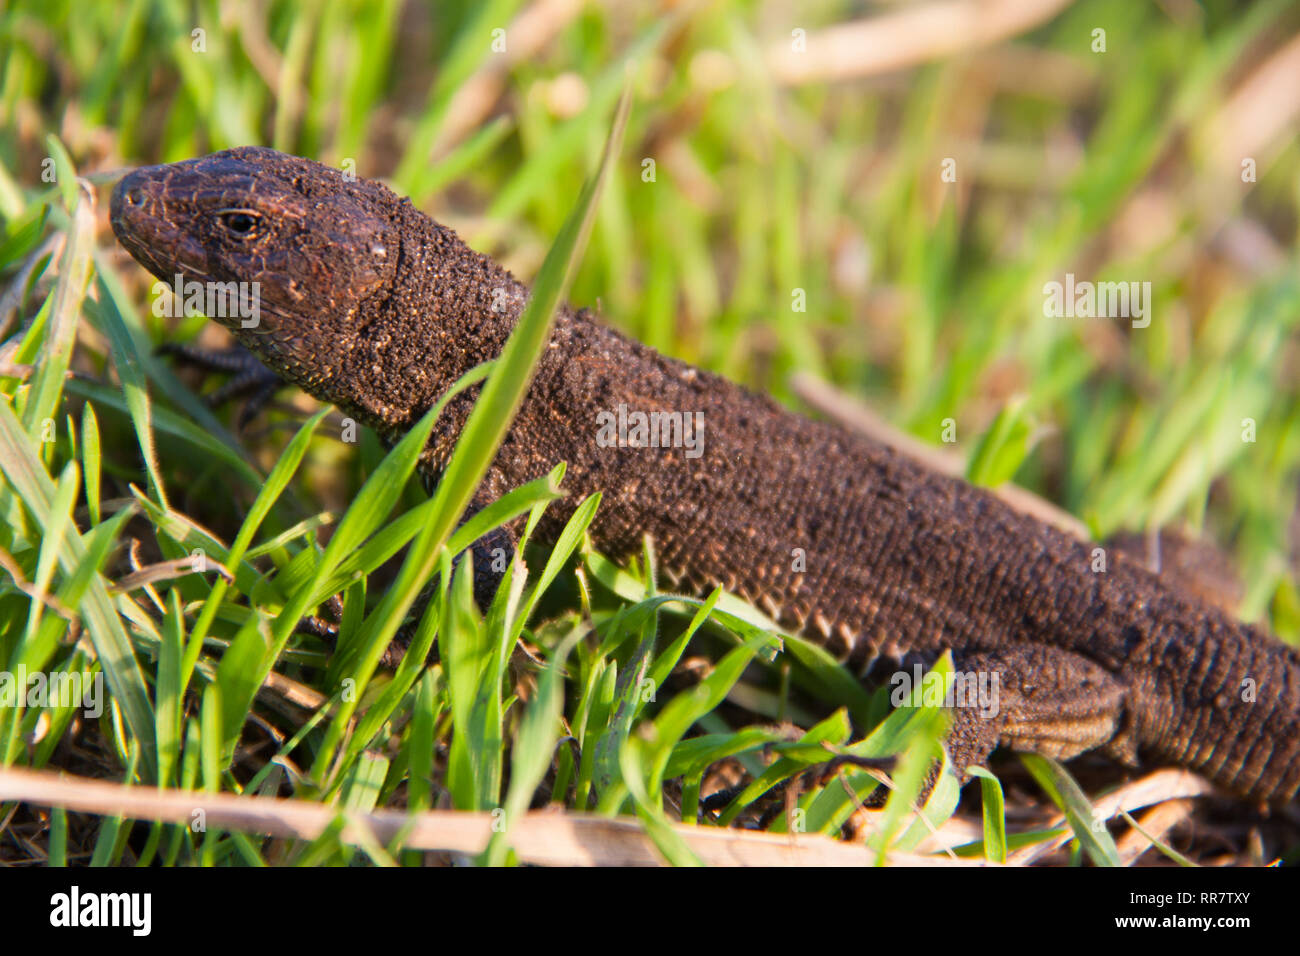 lizard in the grass on a sunny day Stock Photo